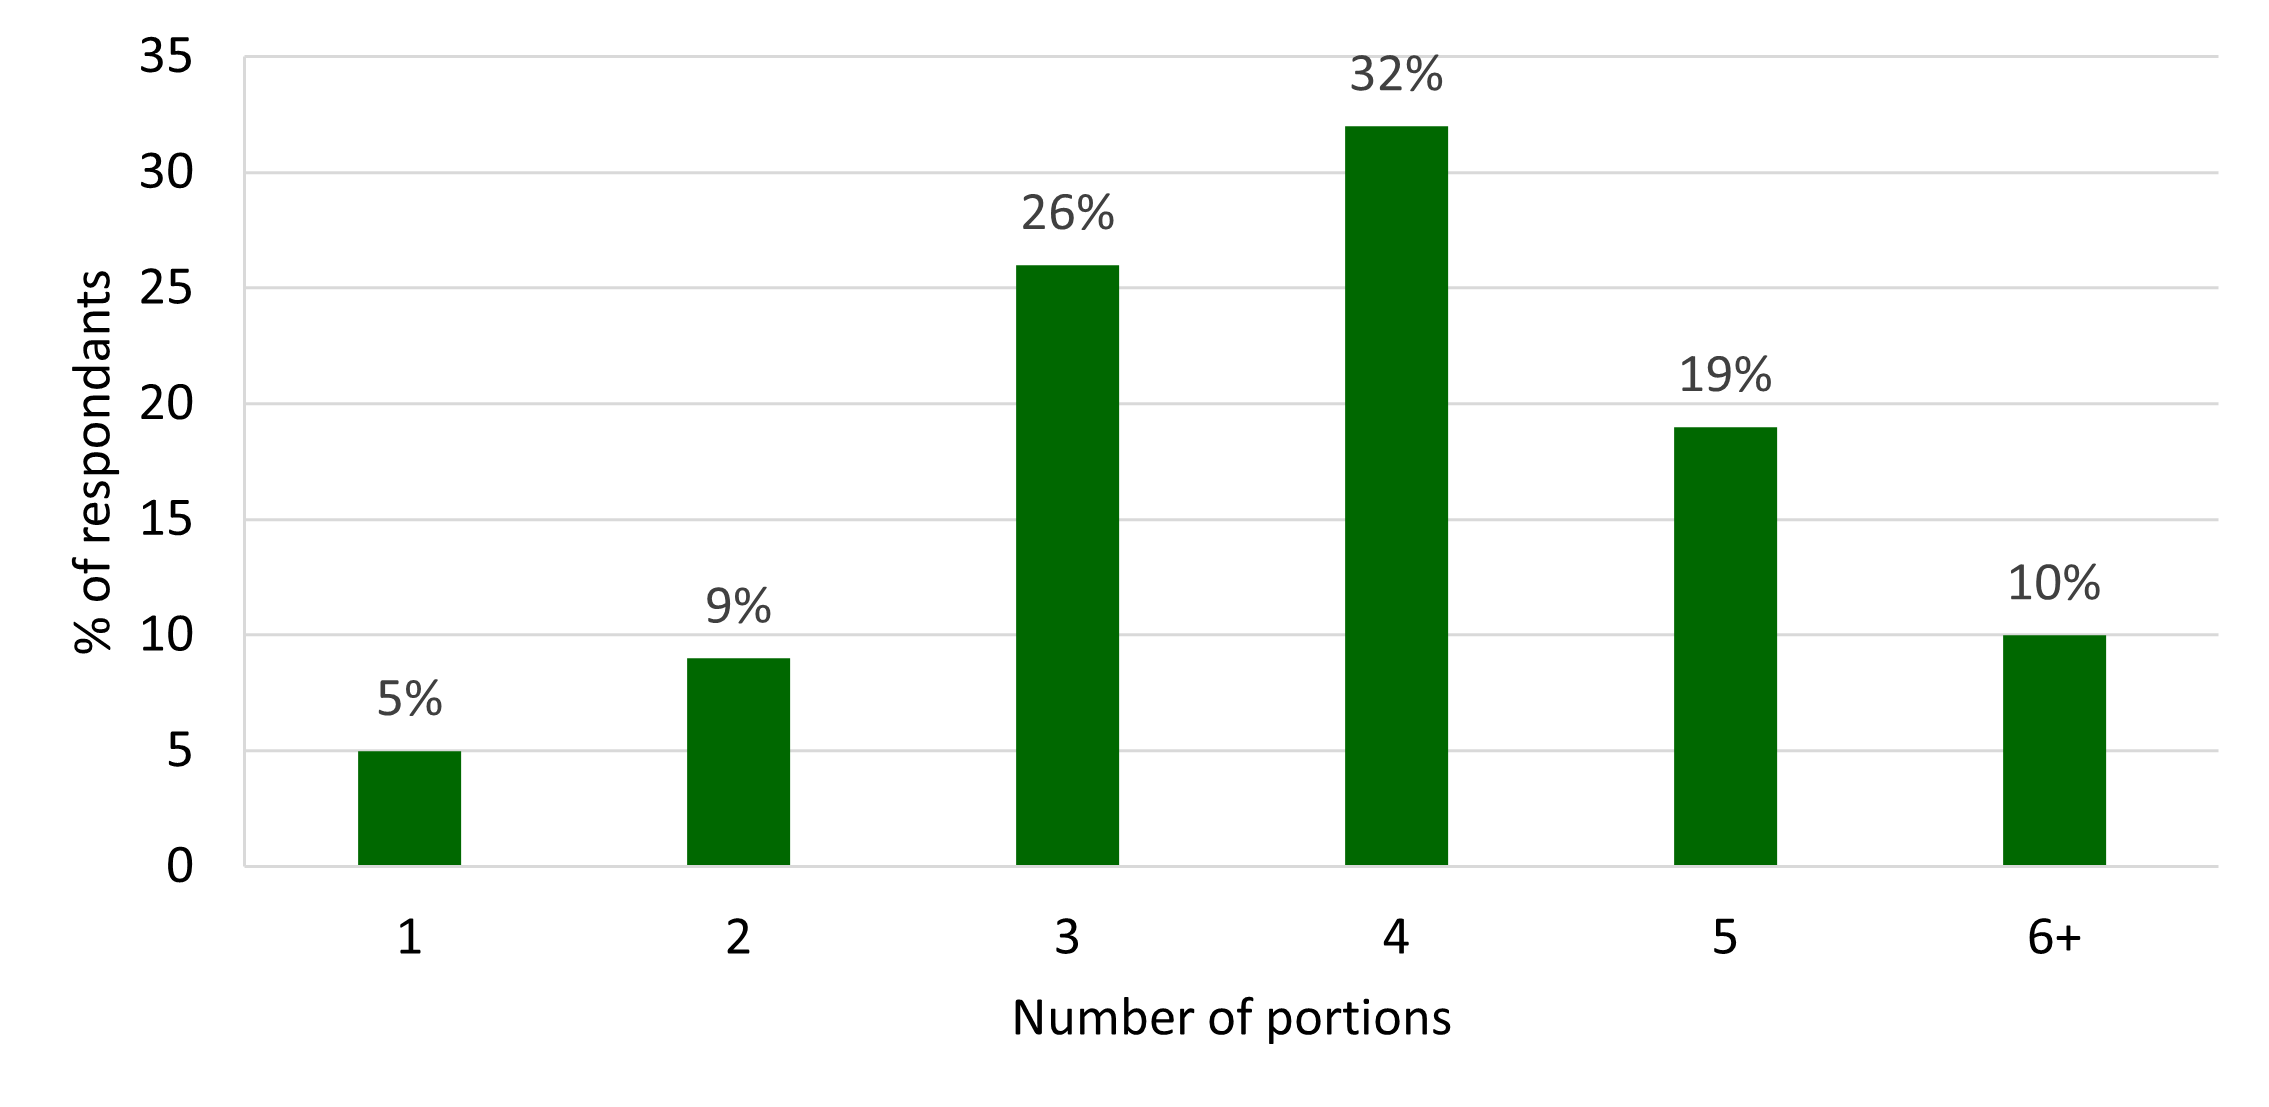 Out of those surveyed, the highest percentage of respondents ate 4 pieces of fruit and vegetables a day (32%), followed by 3 pieces, with 26%. Only 19% of people surveyed ate the recommended 5 pieces a day.